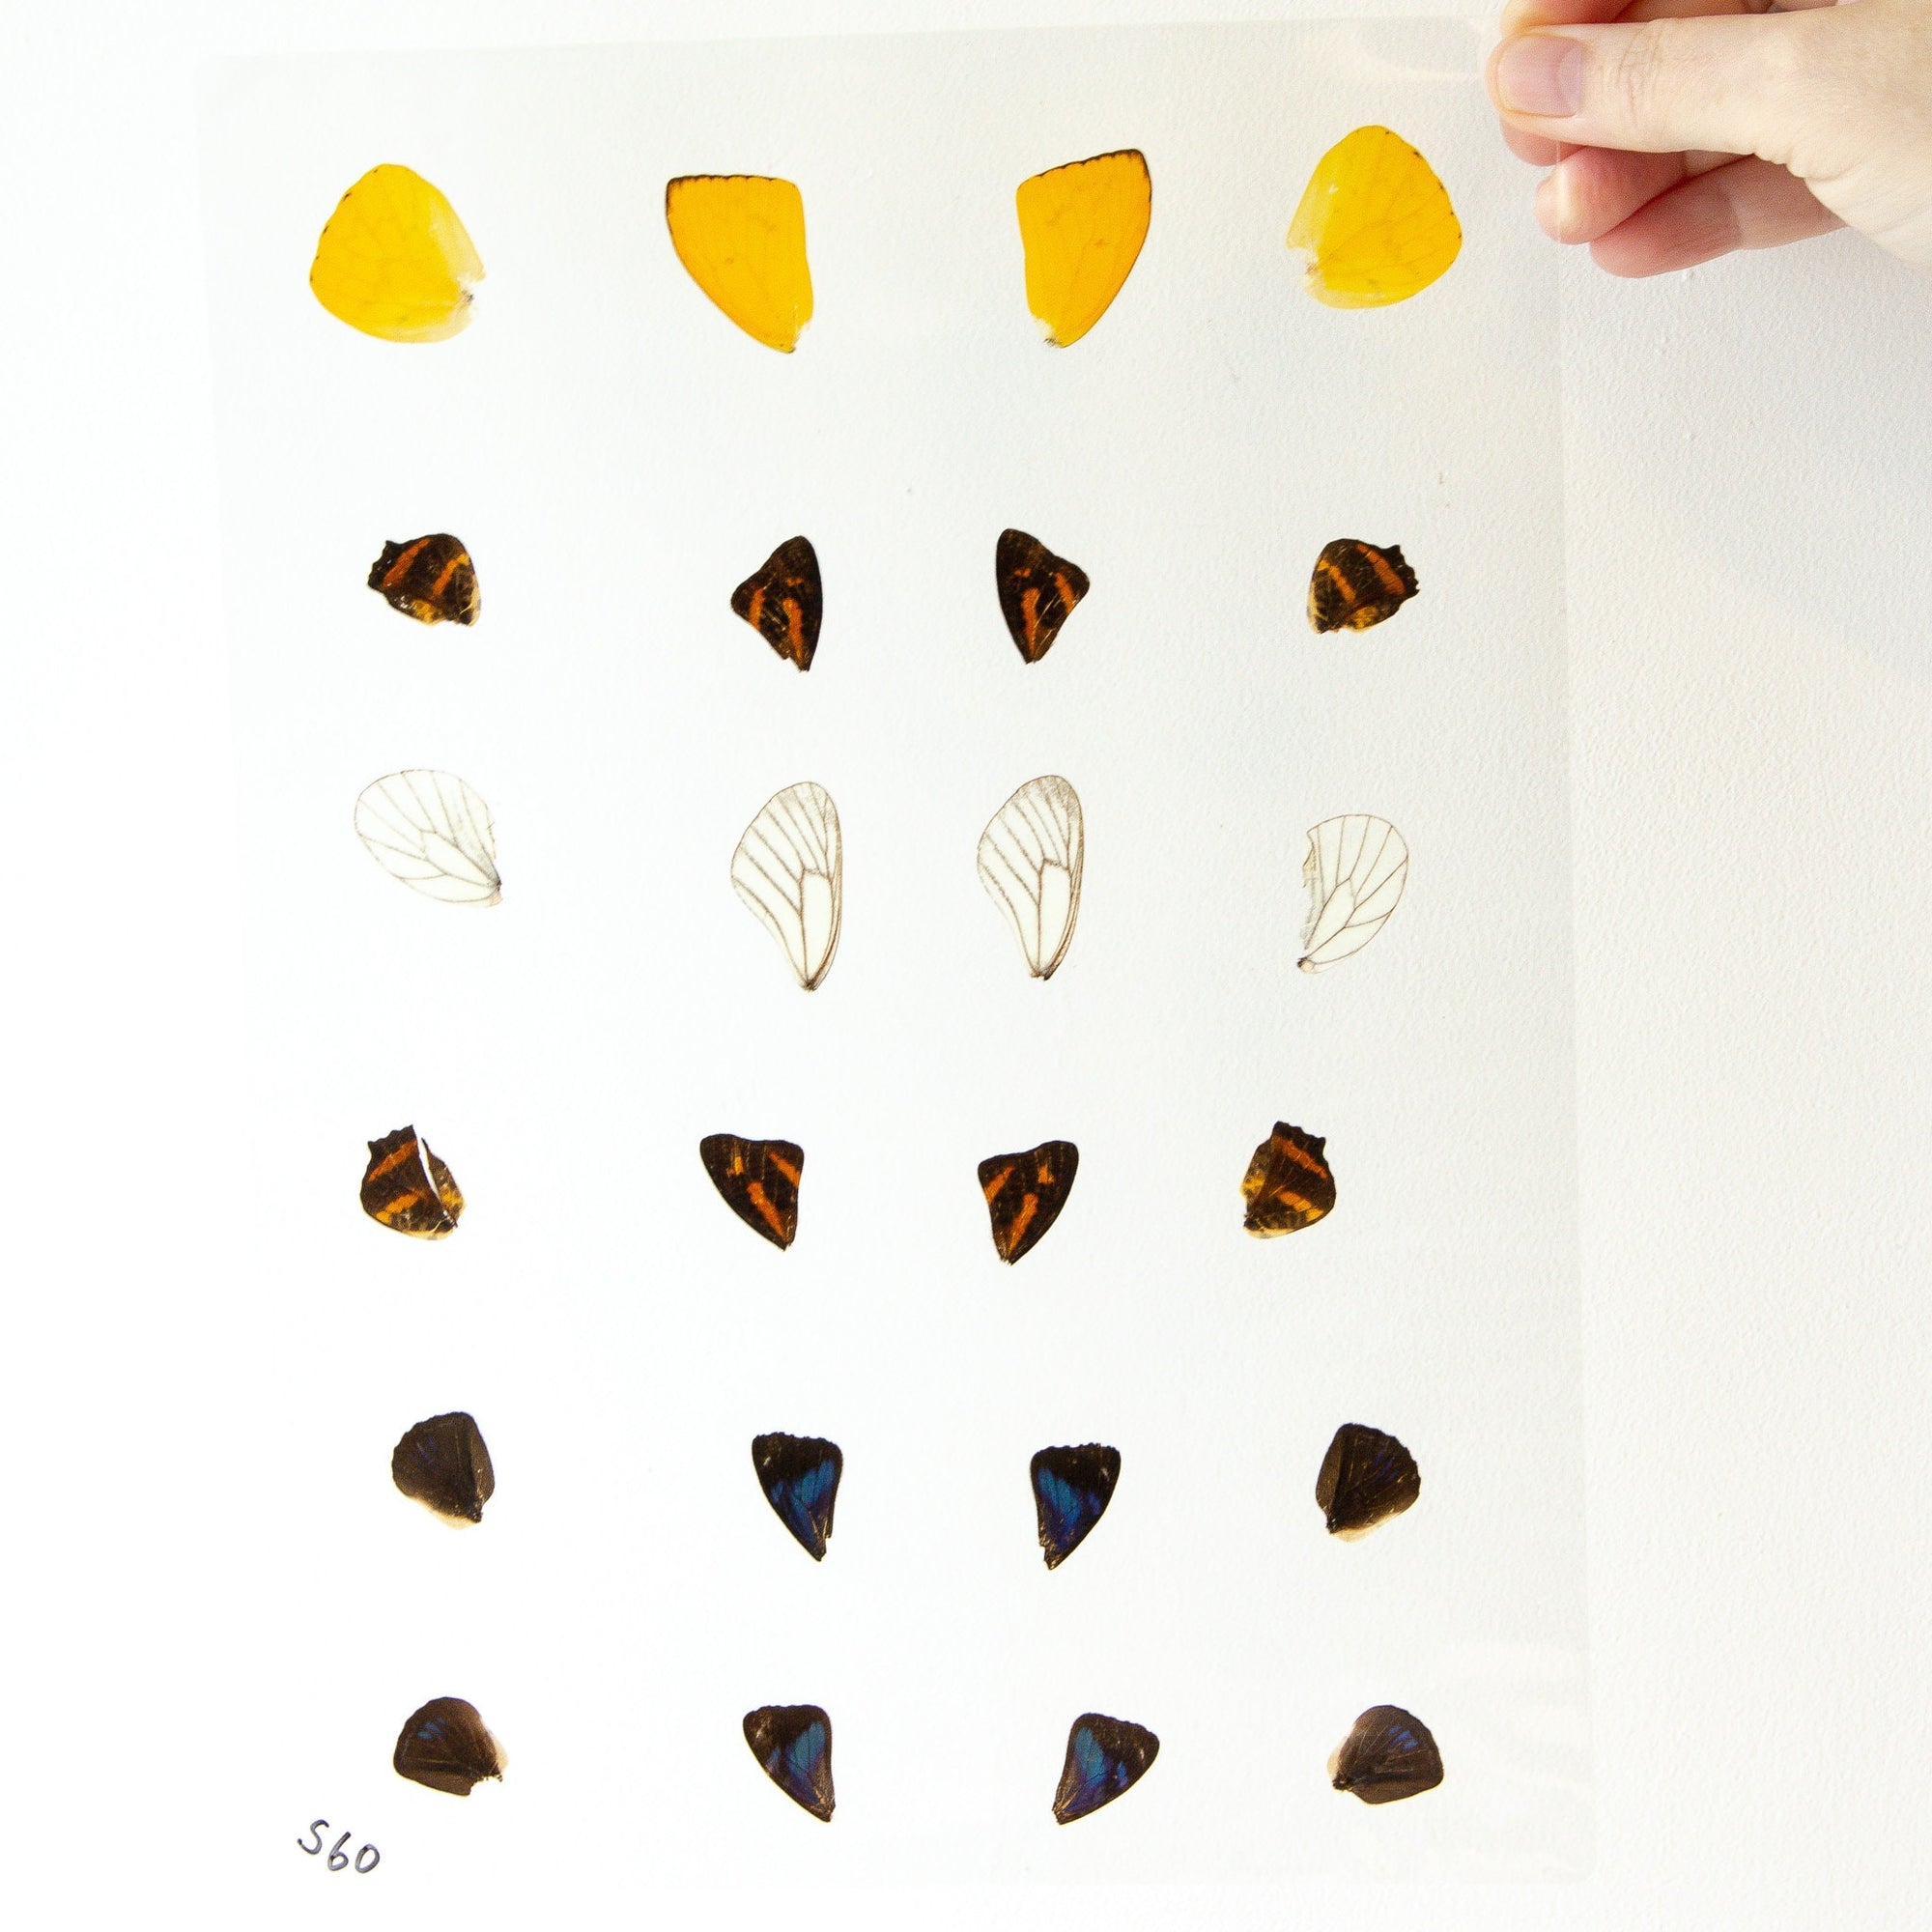 Butterfly Wings GLOSSY LAMINATED SHEET Real Ethically Sourced Specimens Moths Butterflies Wings for Art -- S60